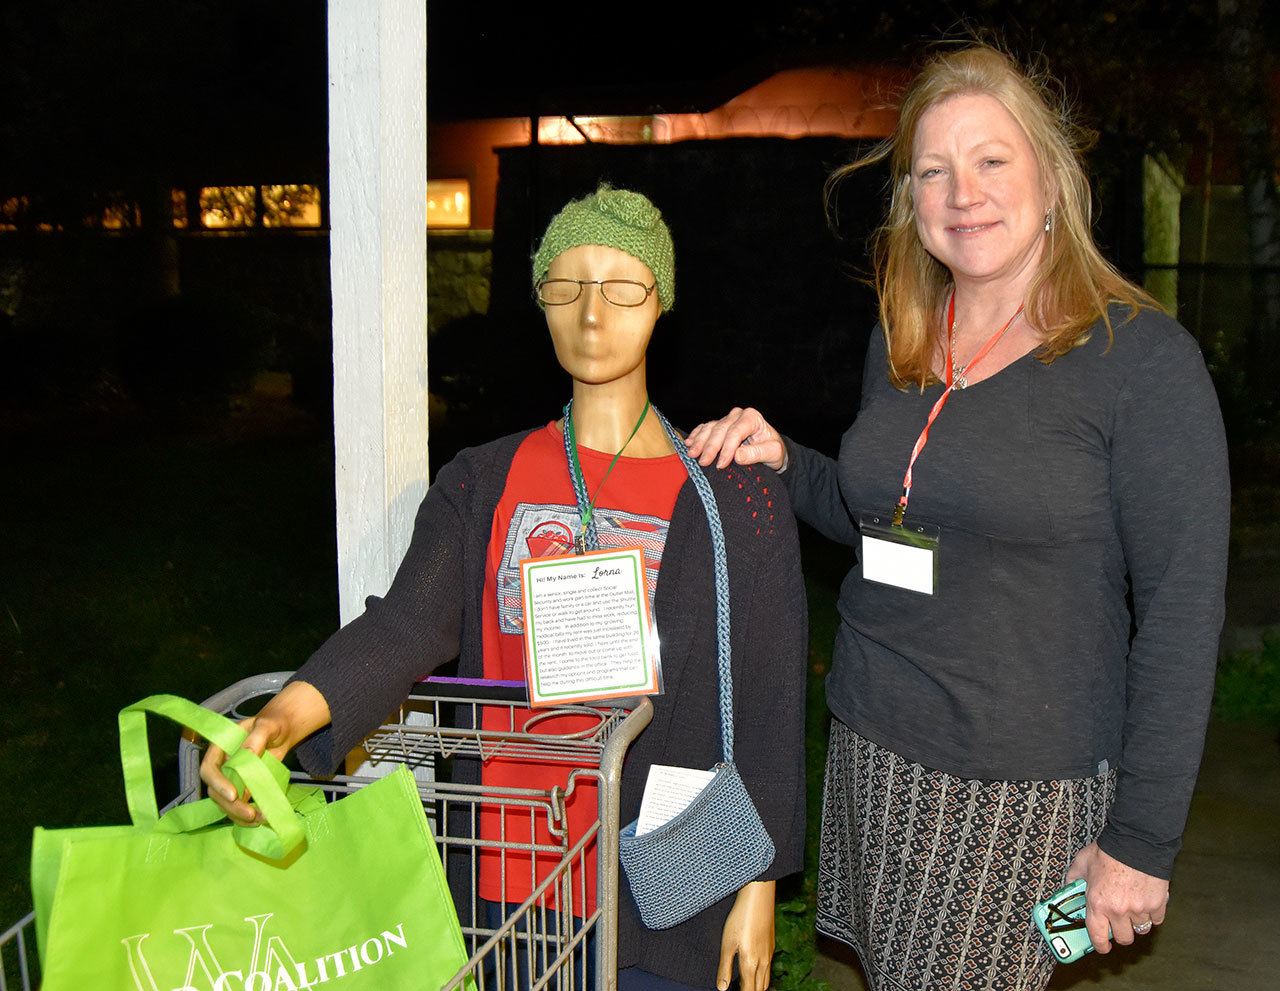 Snoqualmie Valley Food Bank director Heidi Dukich poses with ‘Lorna,’ who represents an actual food bank client, complete with issues in health, transportation and housing. The mannequins at the food bank’s open house introduced guests to the people getting help from the food bank.                                Carol Ladwig/Staff Photo